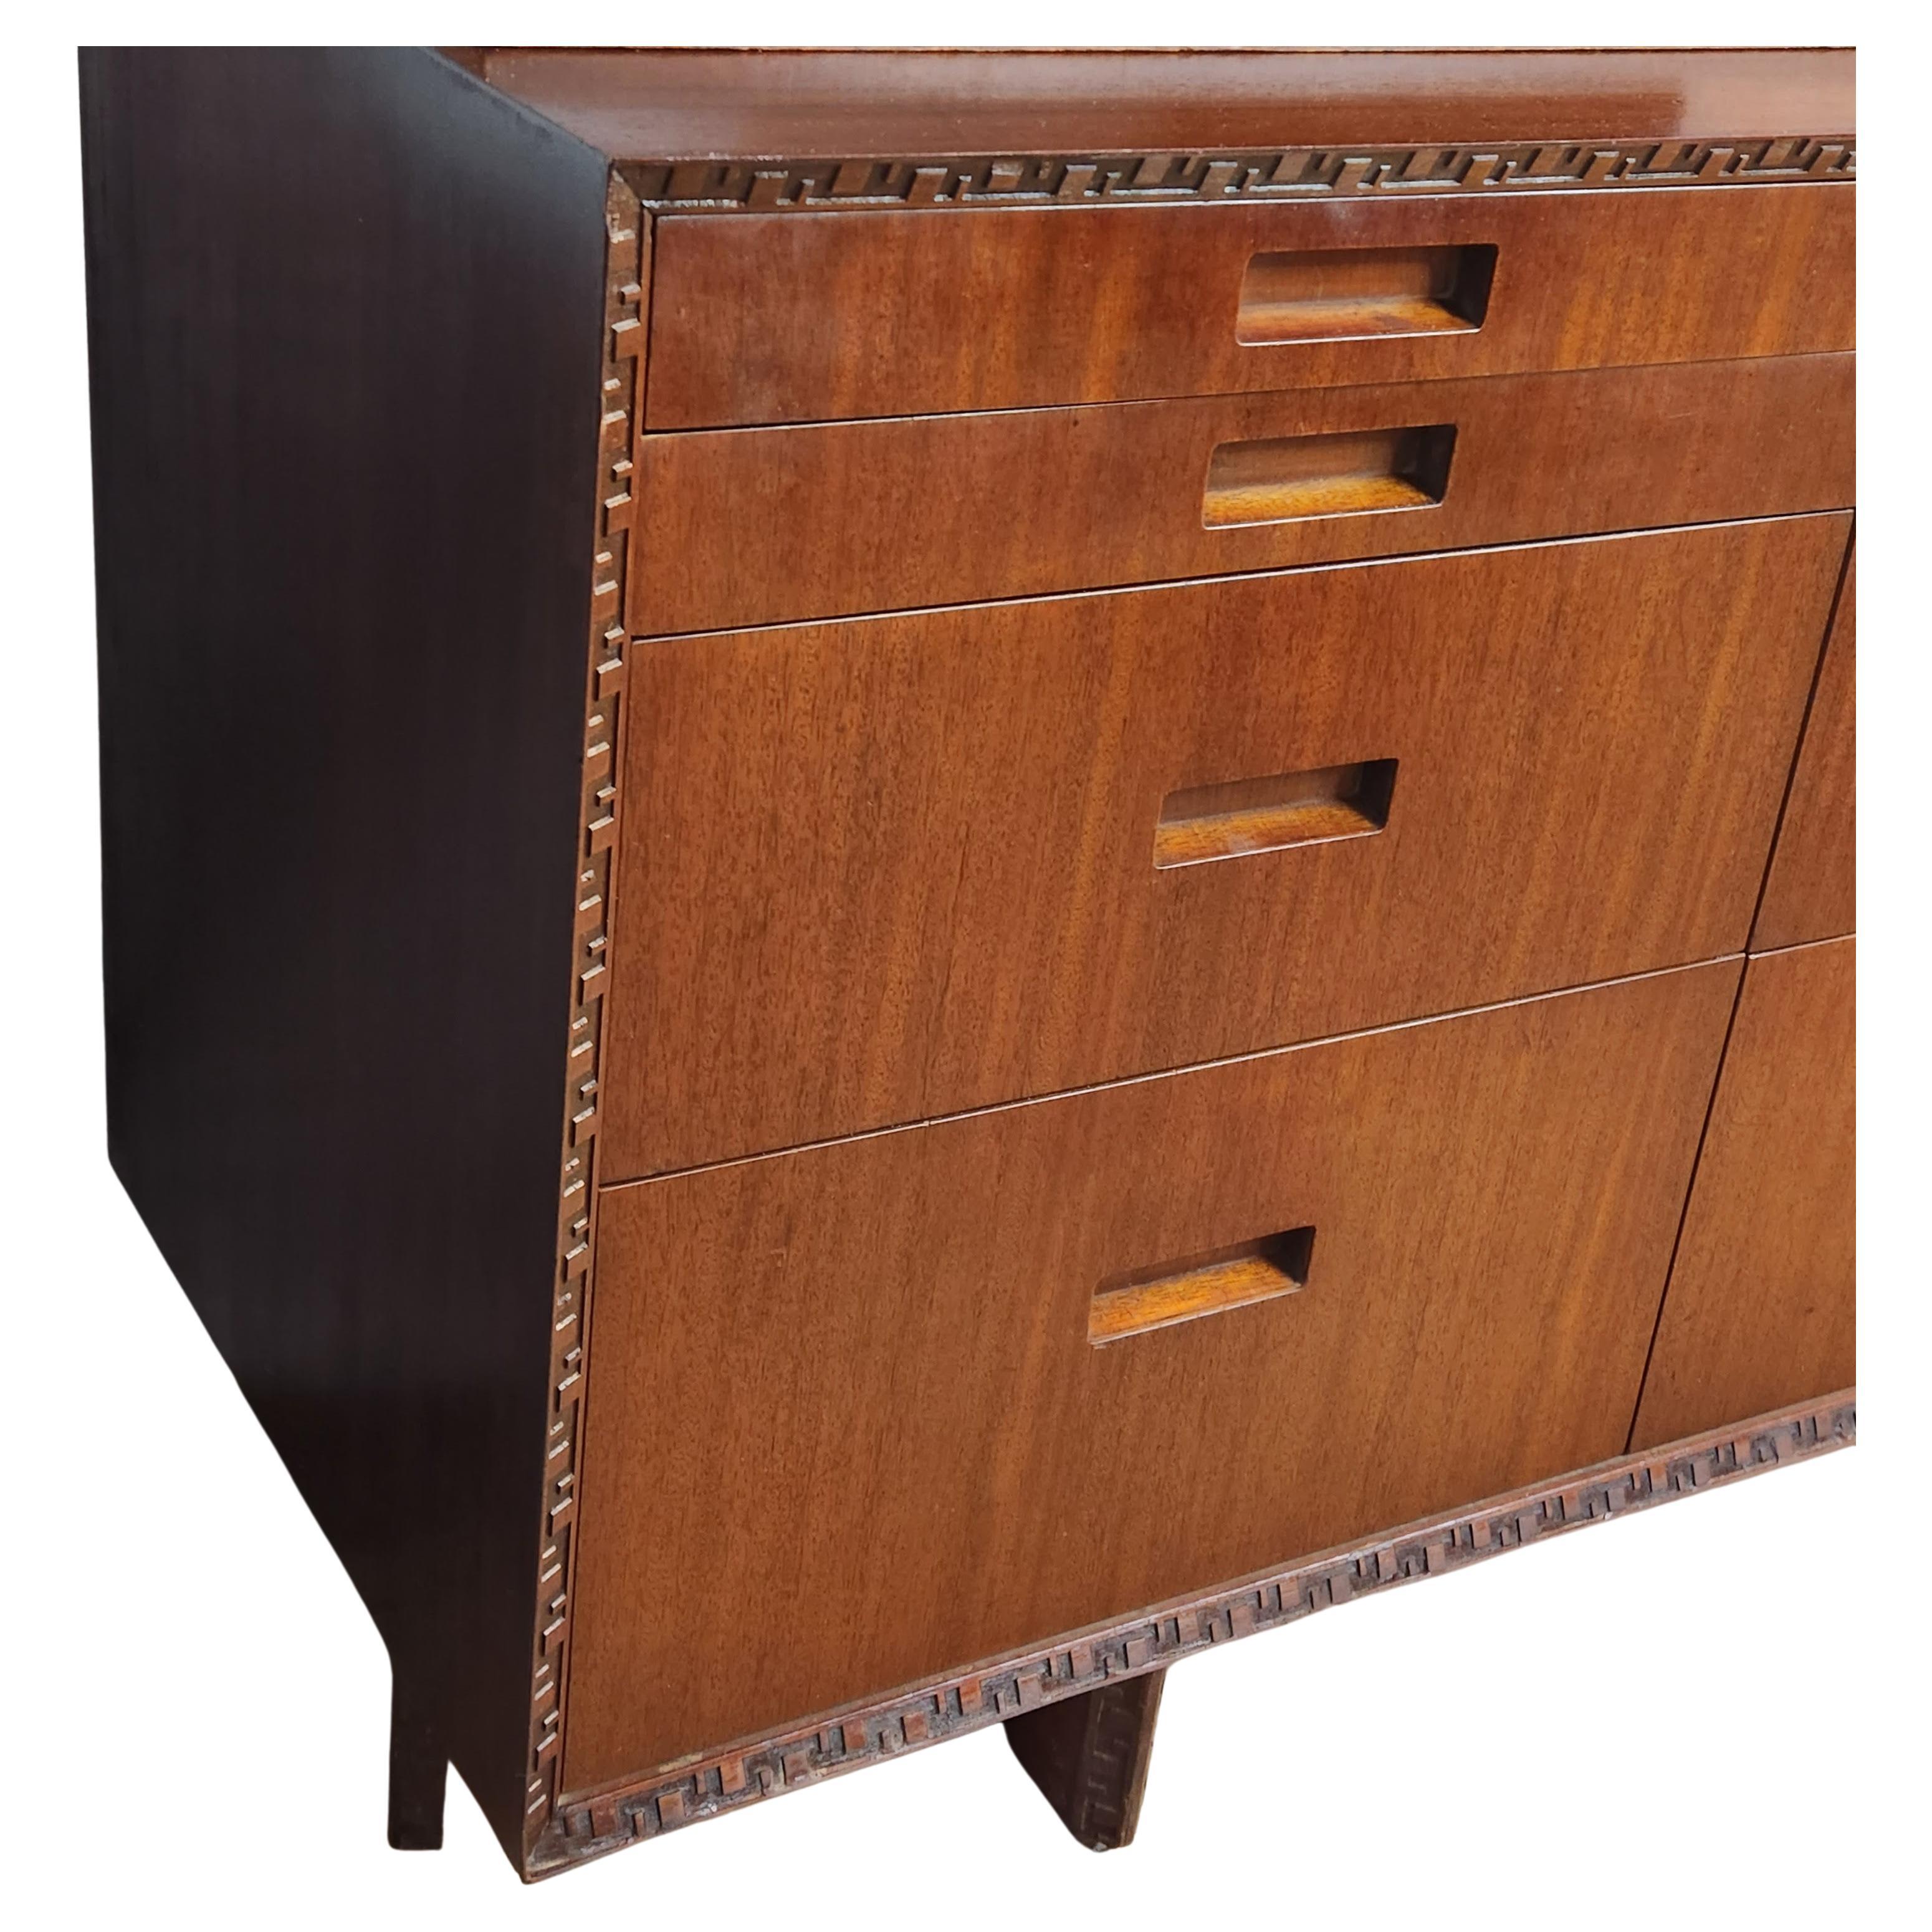 A Honduran Mahogany 11 drawer dresser by Frank Lloyd Wright for Heritage Henredon, part of his Taliesin line.
Signed Frank Lloyd Wright and stamped Heritage Henredon on the inside of a drawer.
This is the only line of furniture that bears his